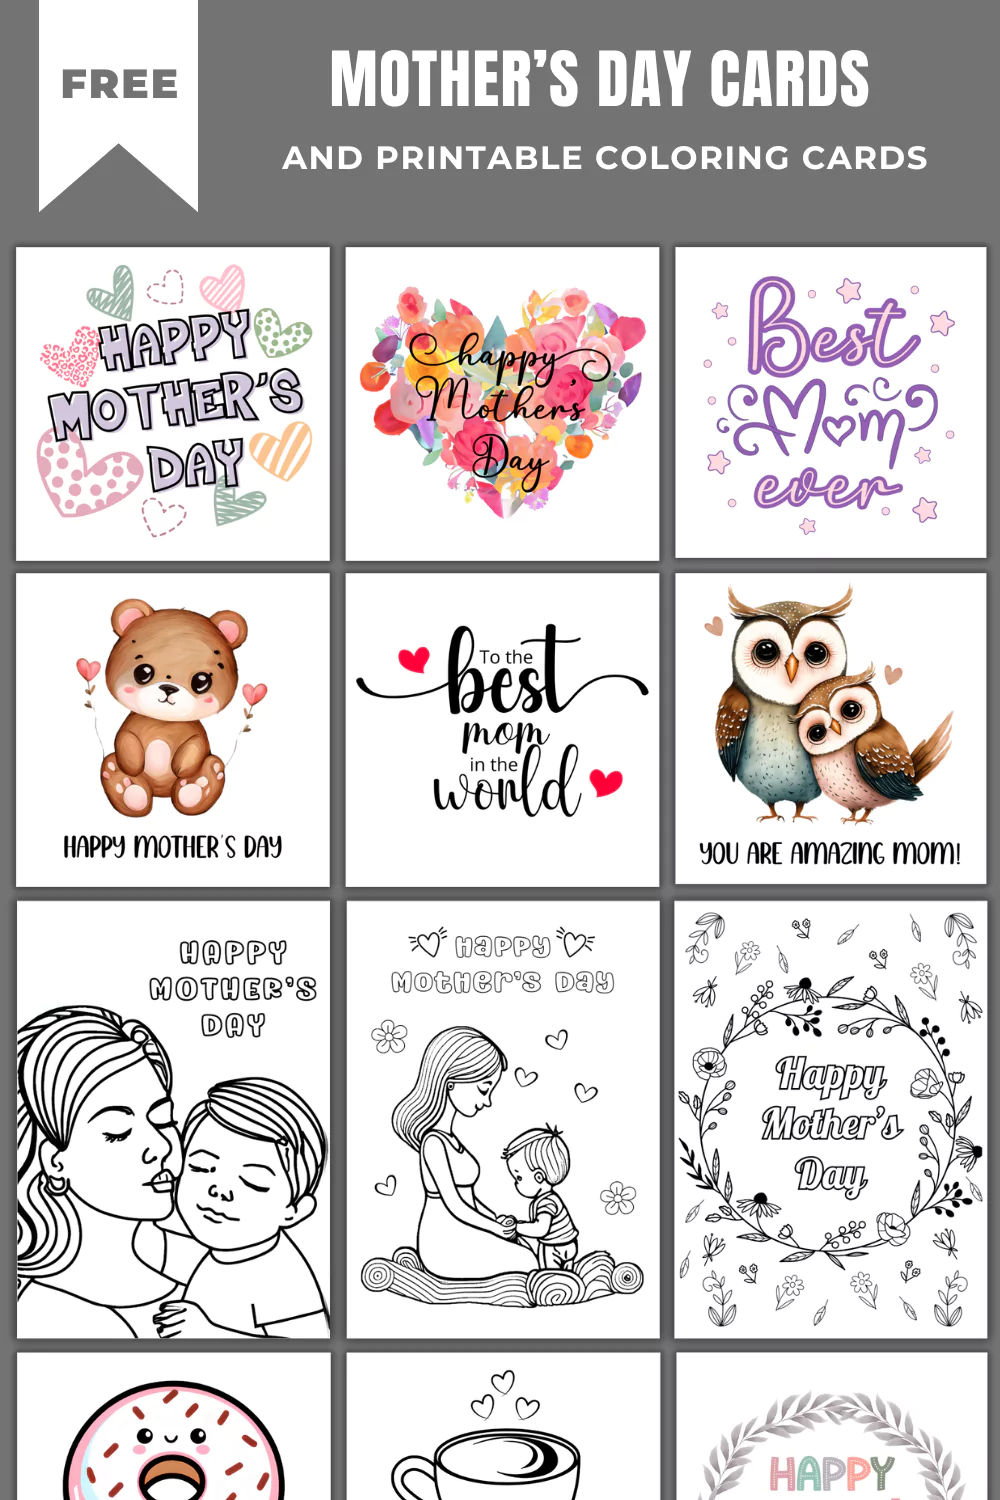 Click here for Mother' Day Cards